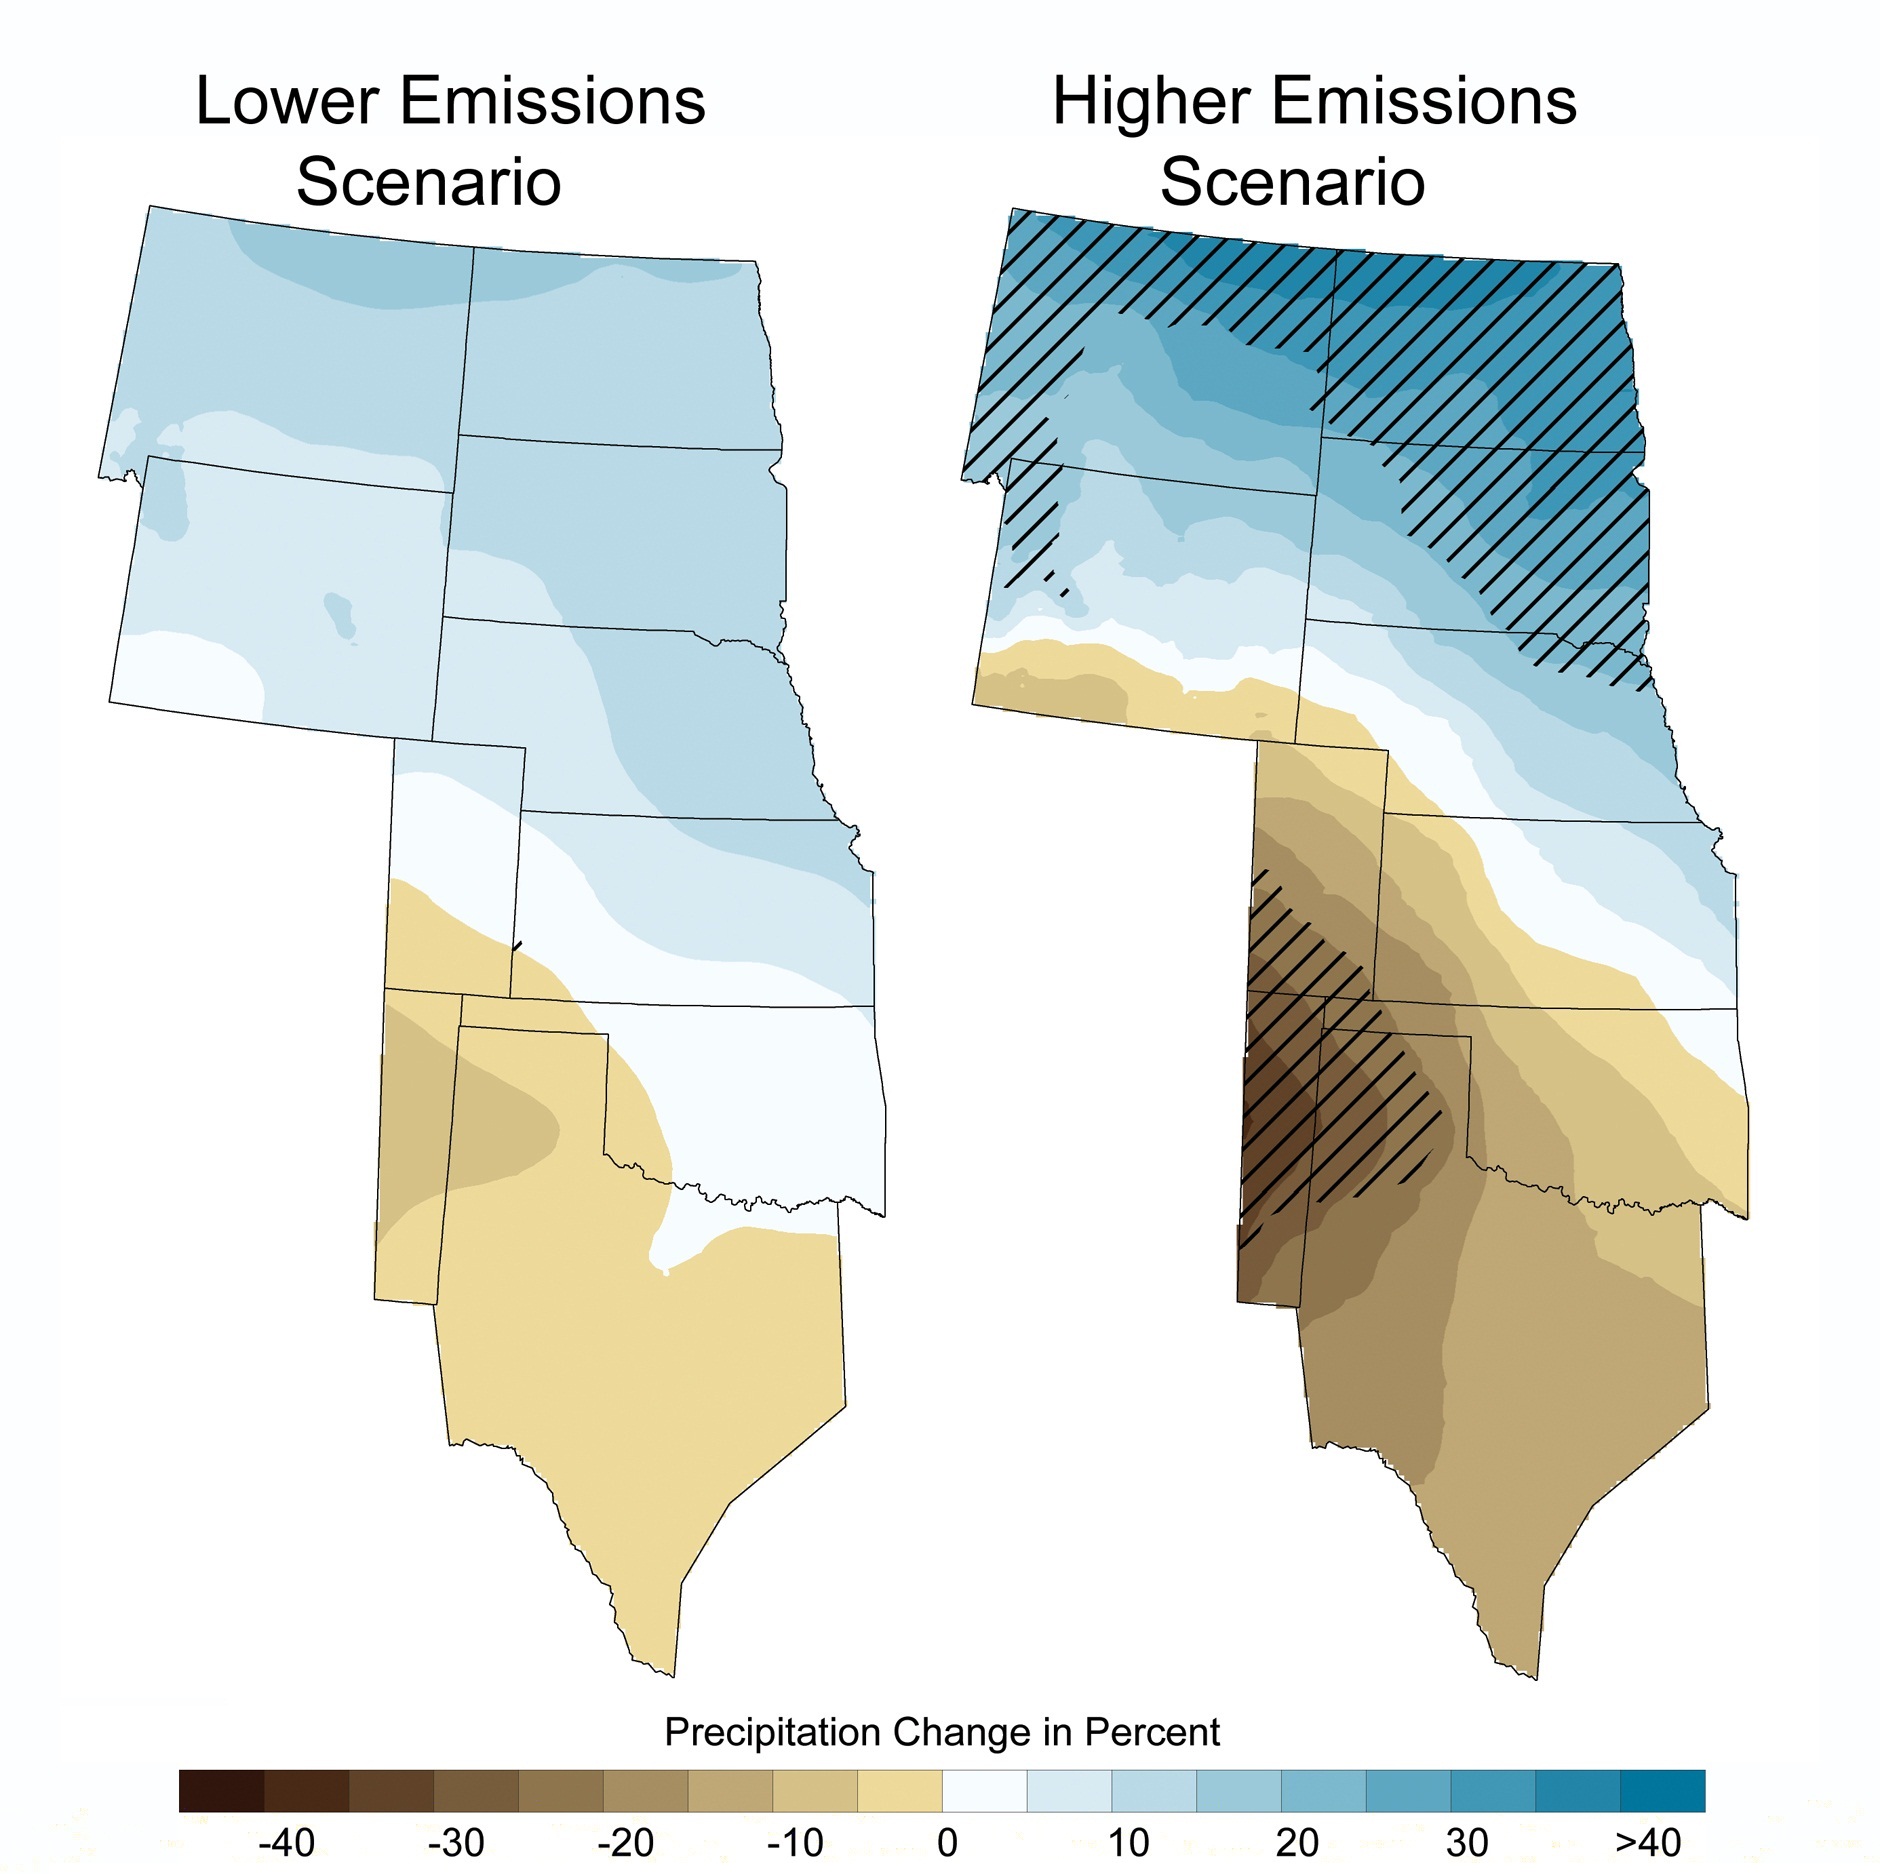 Two side by side maps that show the projected precipitation change in percent under a lower emissions scenario and a higher emissions scenario. Under both scenarios the southwest portion is projected to experience a decrease in precipitation ranging from zero to about forty percent. Under the higher emissions scenario the area that would experience a decline in precipitation is larger and the decrease is more significant. Both maps show an expected increase in precipitation in the northeast region of the Great Plains. Again, under the higher emissions scenario, the projected increase in precipitation is more significant - ranging from zero to about forty percent. Overall, the changes in precipitation are projected to be more significant under the higher emissions scenario - with declines in precipitation in the southwest and increases in precipitation in the northeastern portion of the Great Plains.